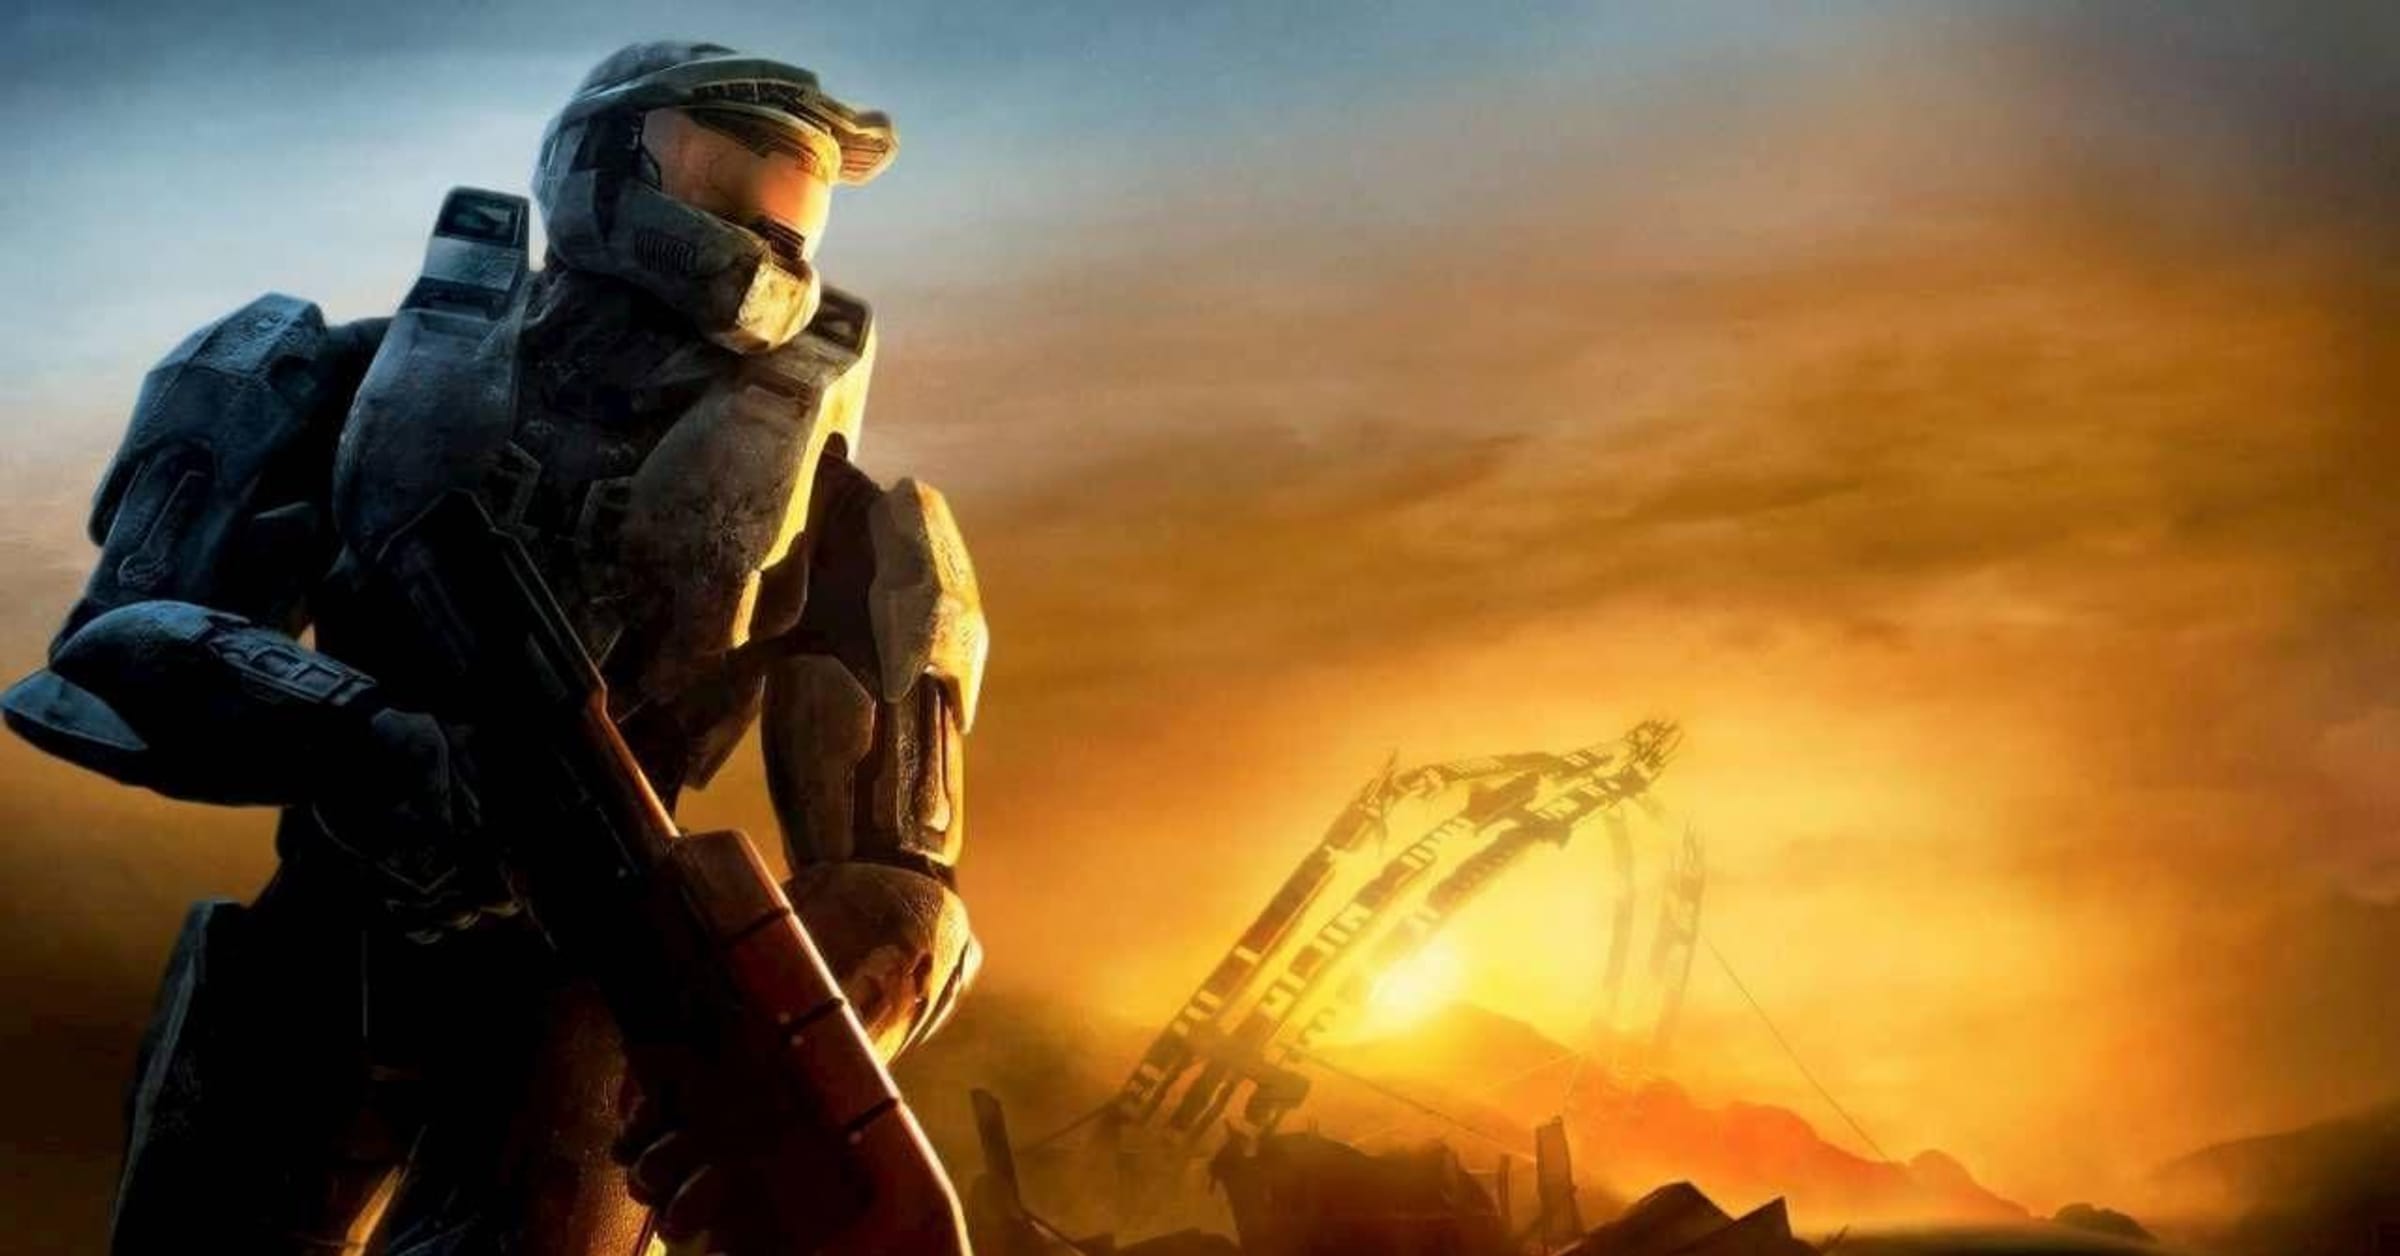 Ranking The Best @Halo Trailers of All Time - XboxEra